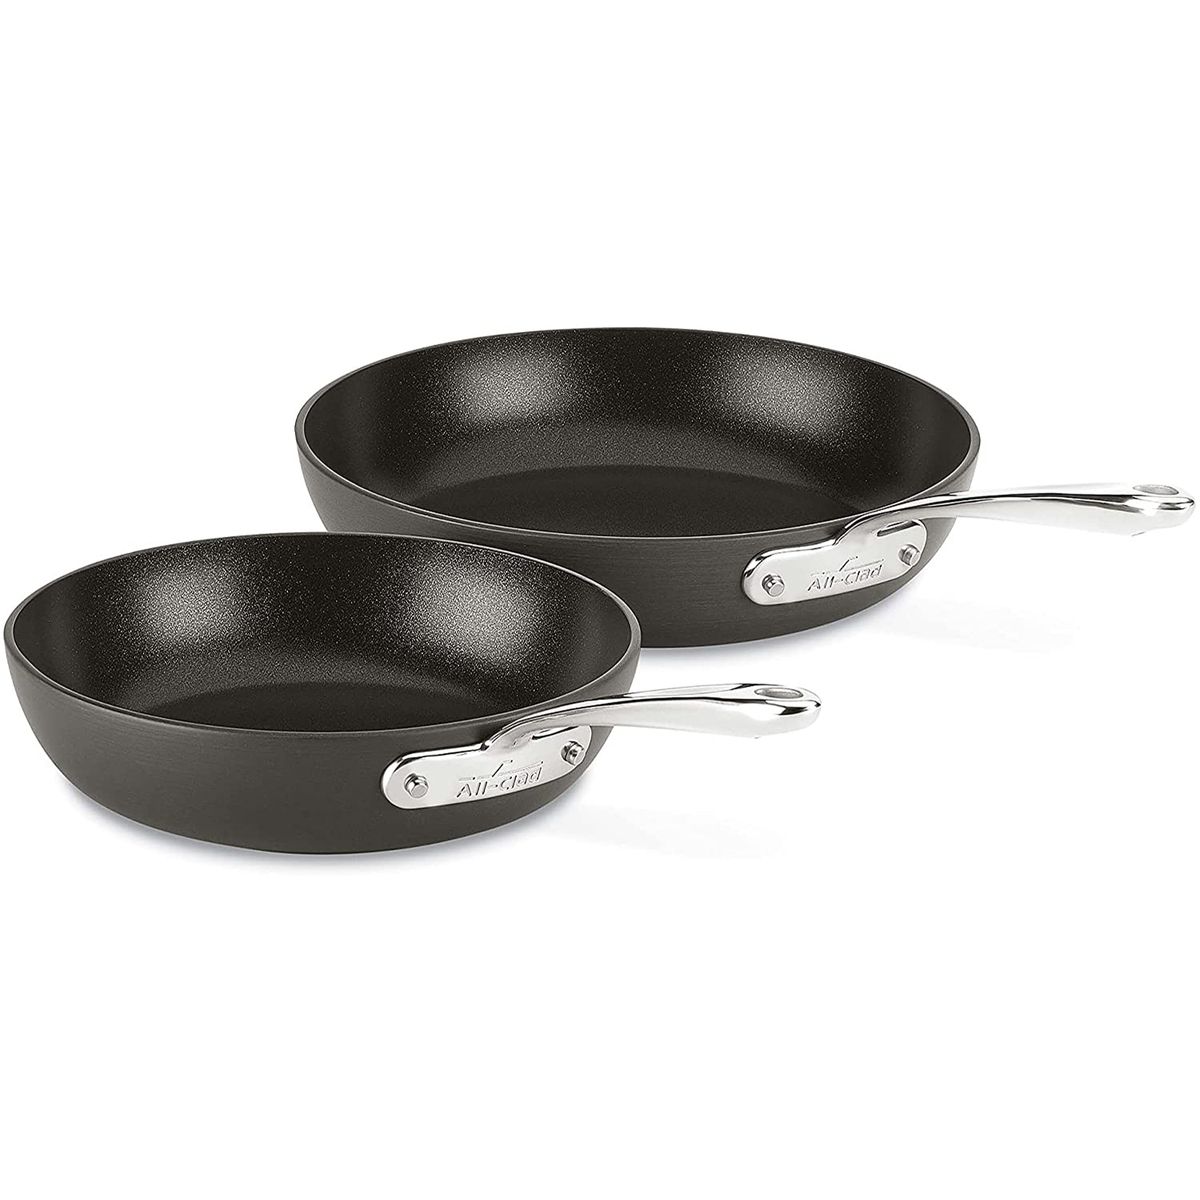 All-Clad Essentials Nonstick Hard Anodized Fry Pan, 2-Piece, Grey